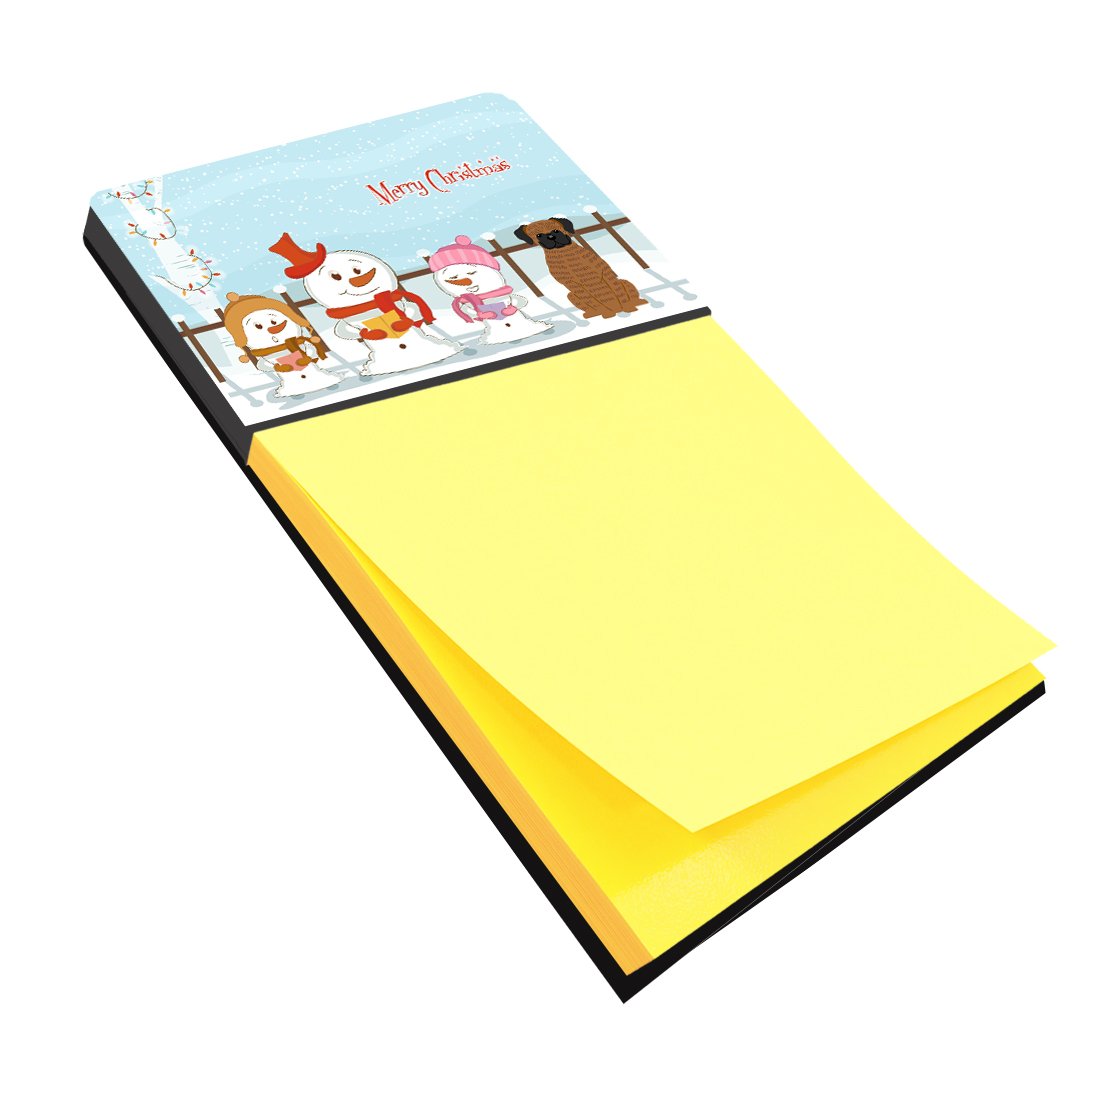 Merry Christmas Carolers Brindle Boxer Sticky Note Holder BB2448SN by Caroline's Treasures